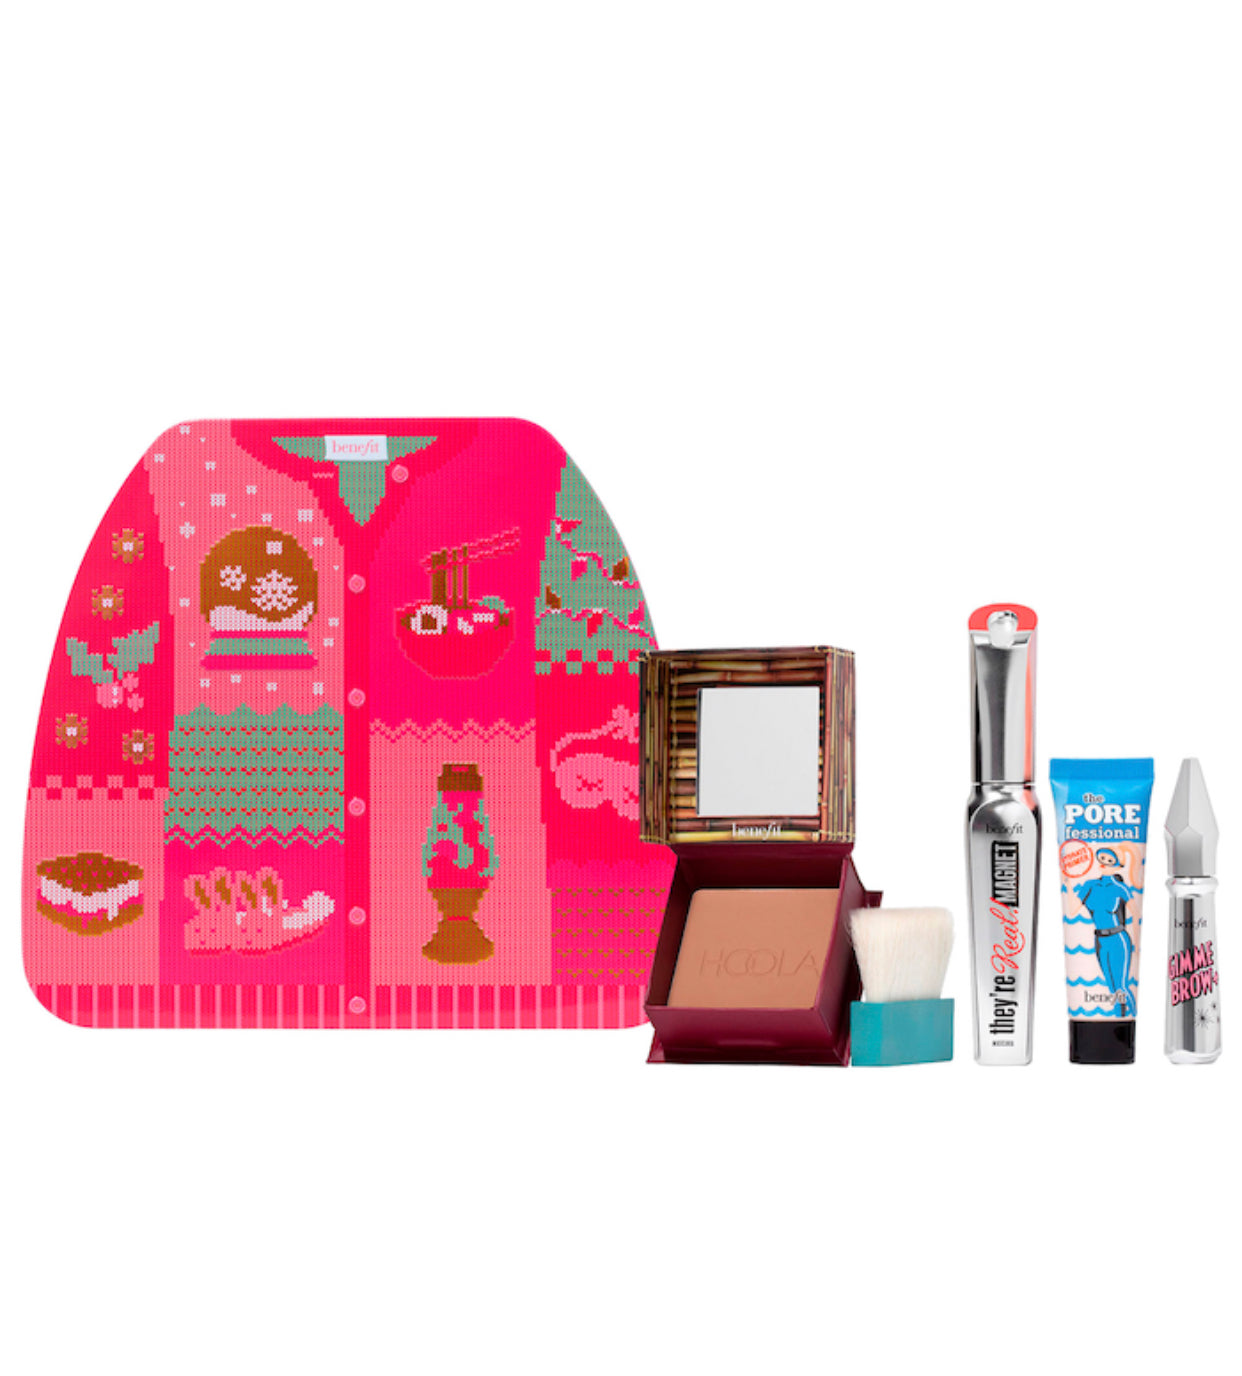 BENEFIT COSMETICS, HOLIDAY CUTIE BEAUTY MAKEUP BESTSELLERS VALUE SET